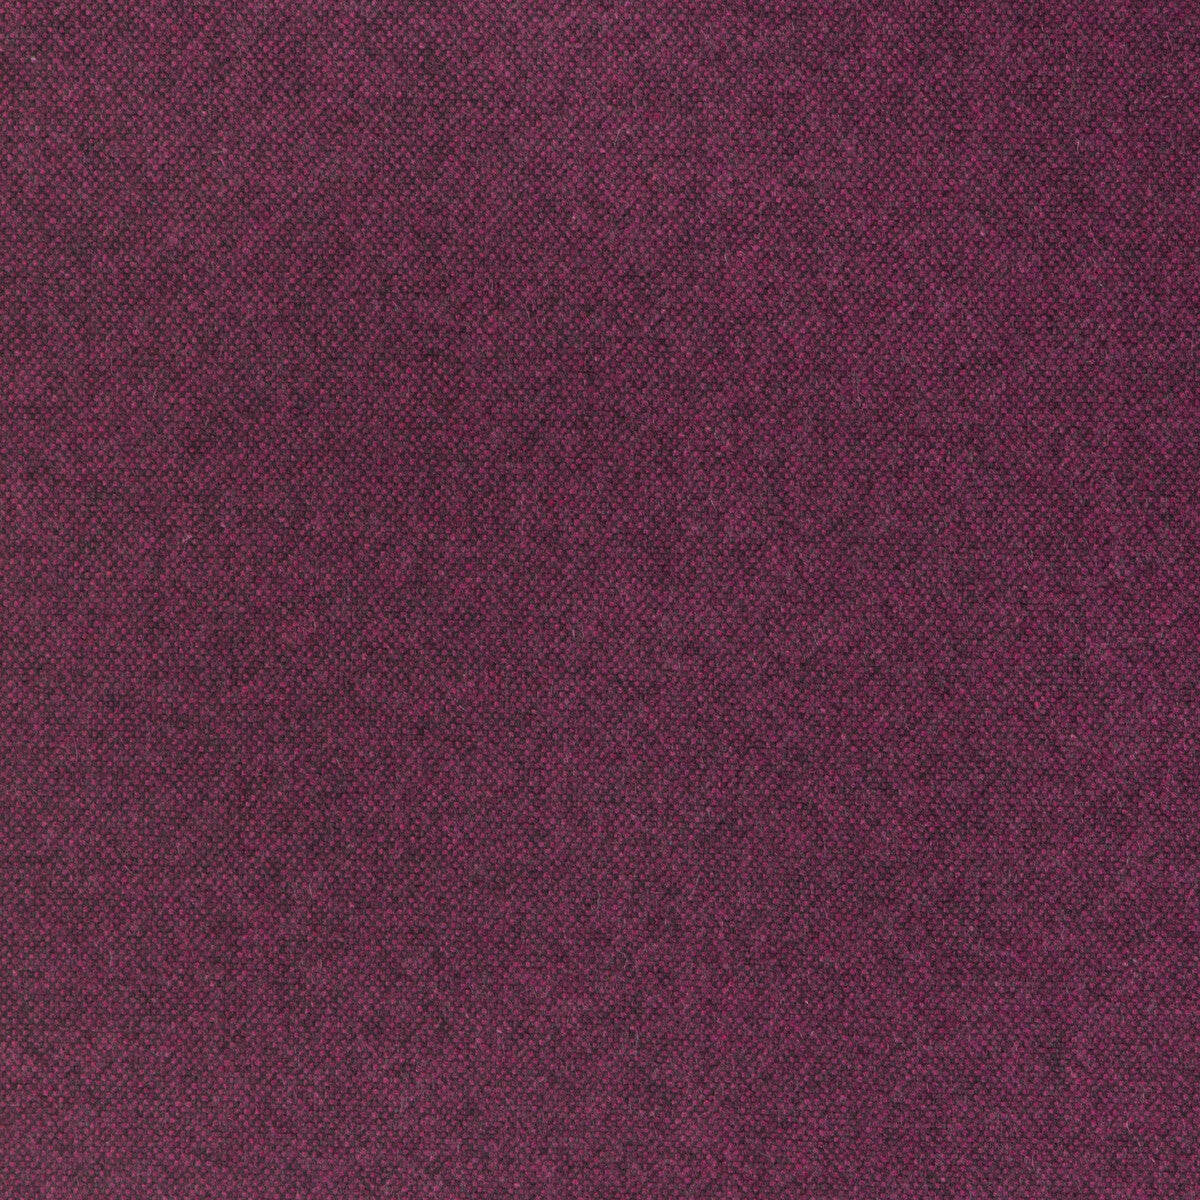 Manchester Wool fabric in mulberry color - pattern 37026.97.0 - by Kravet Contract